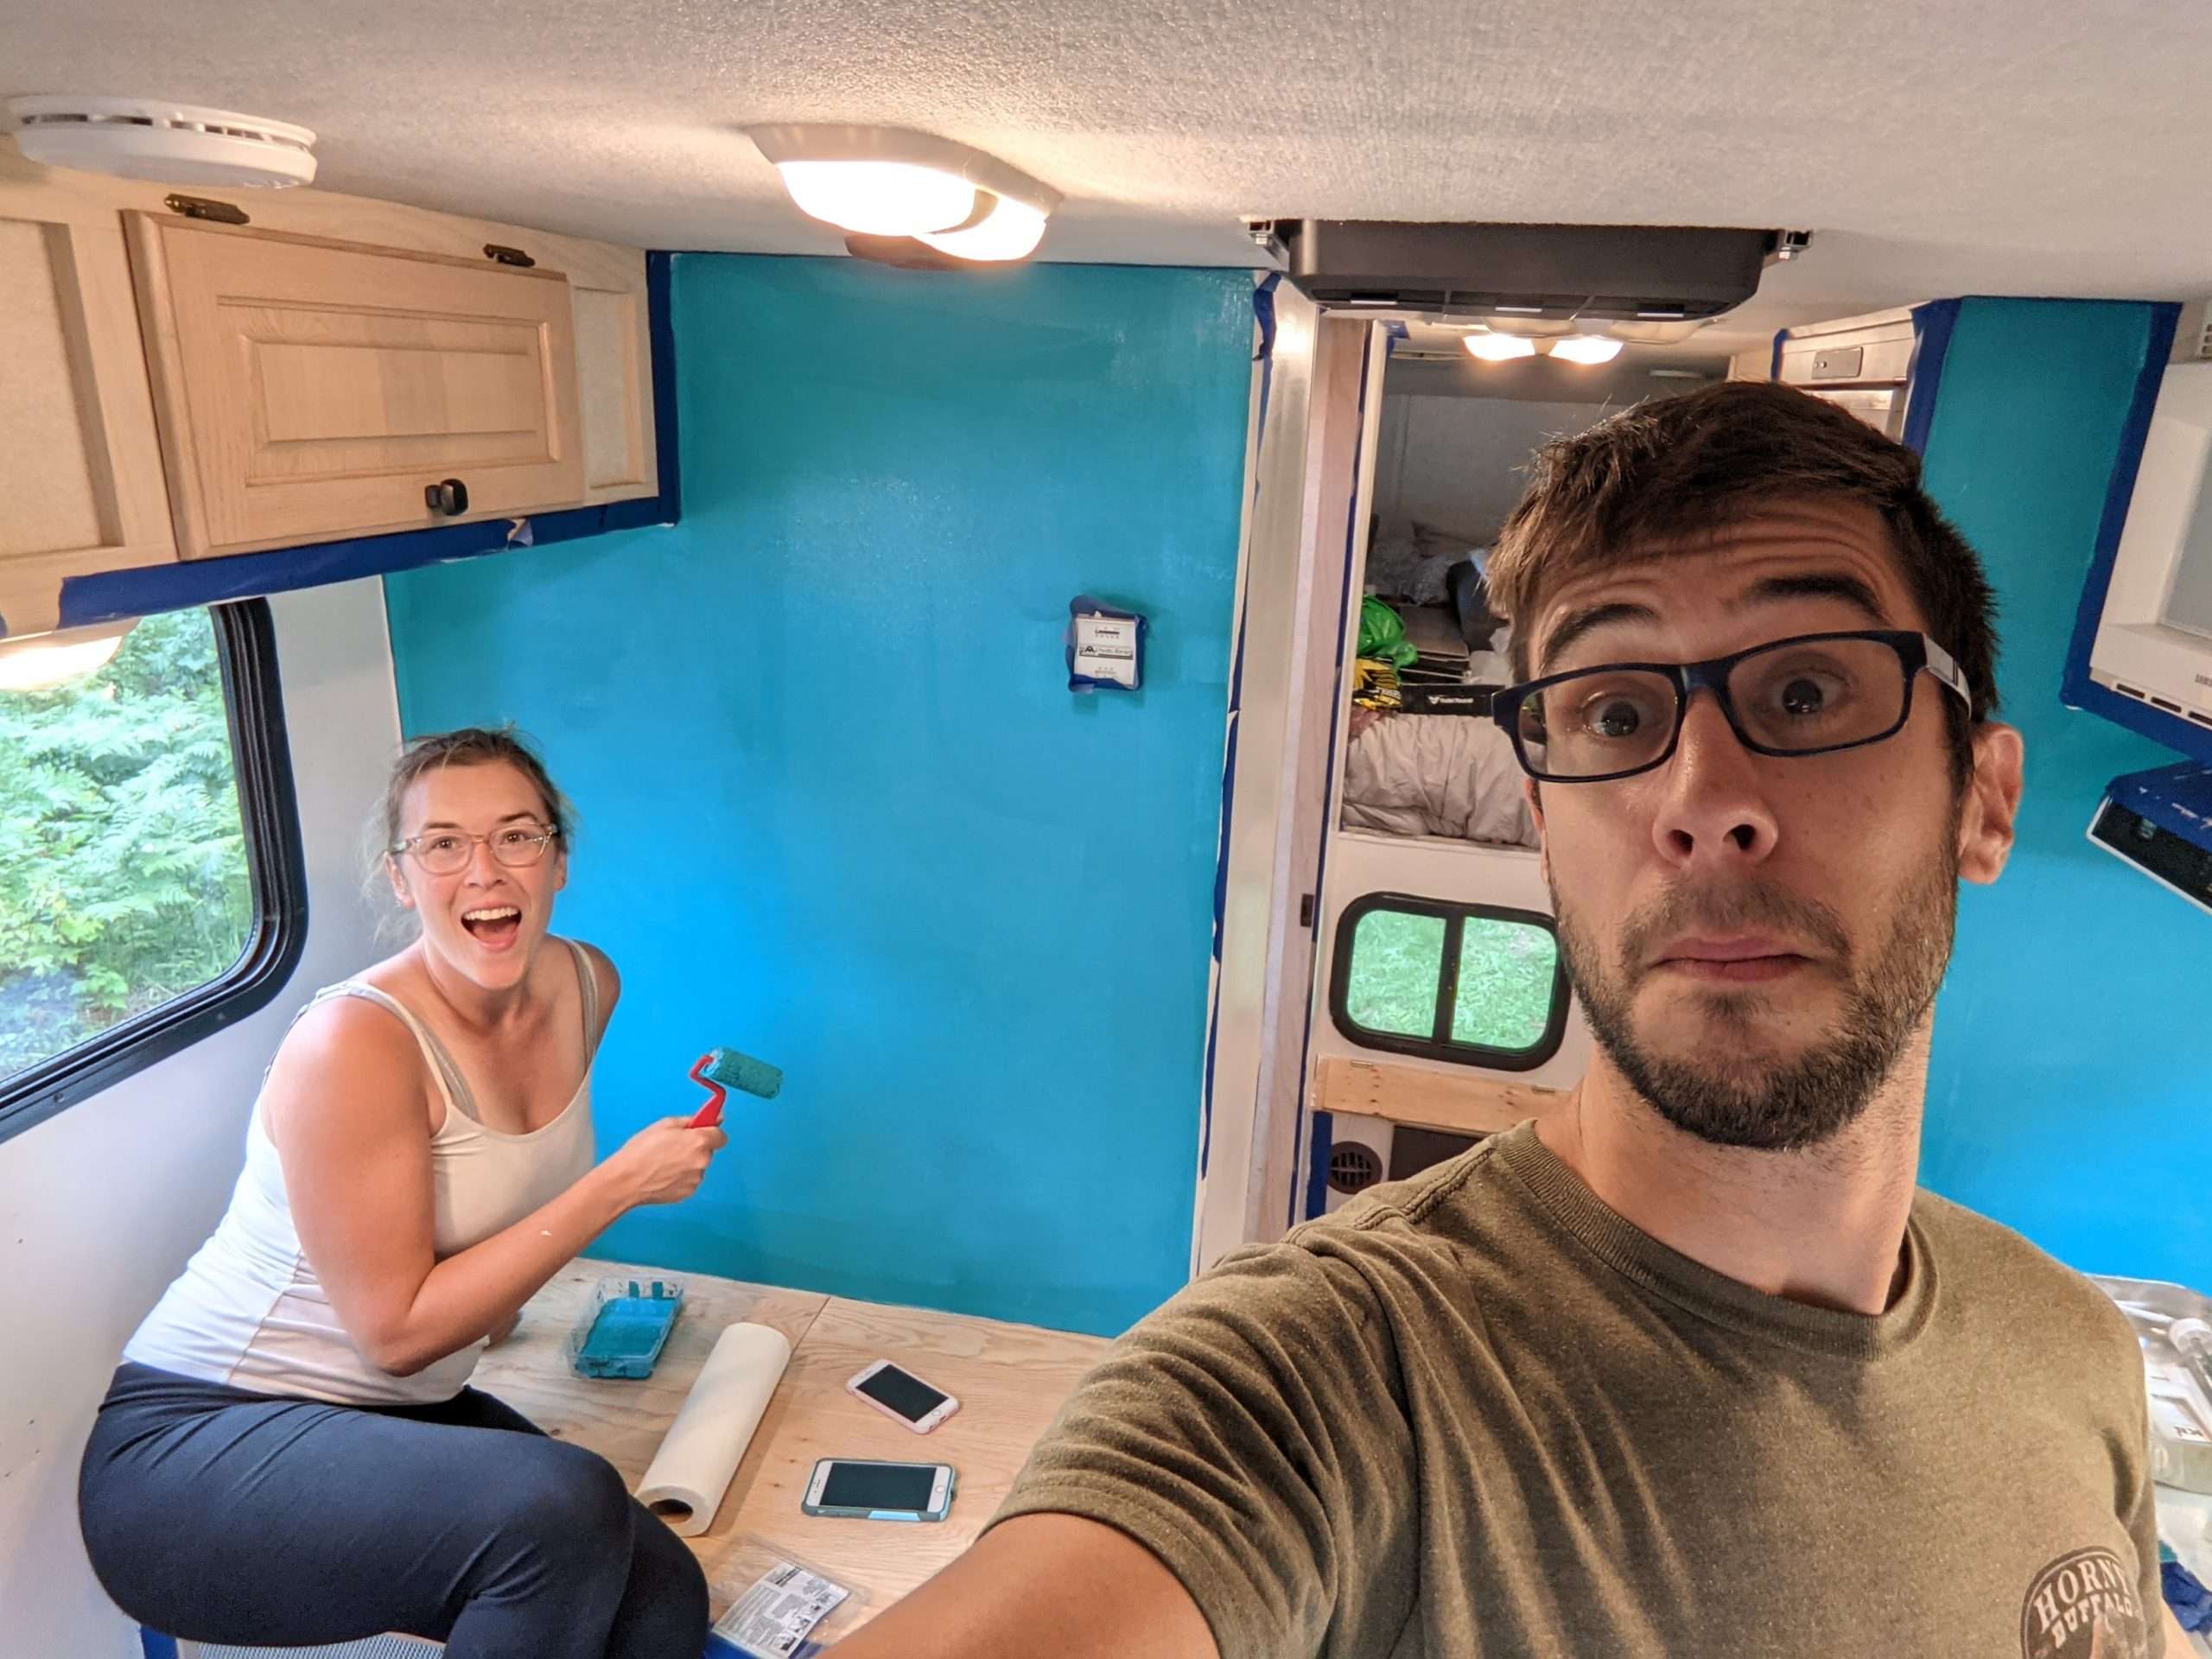 5 Easy RV Interior Painting Ideas to Spruce Up Your Camper